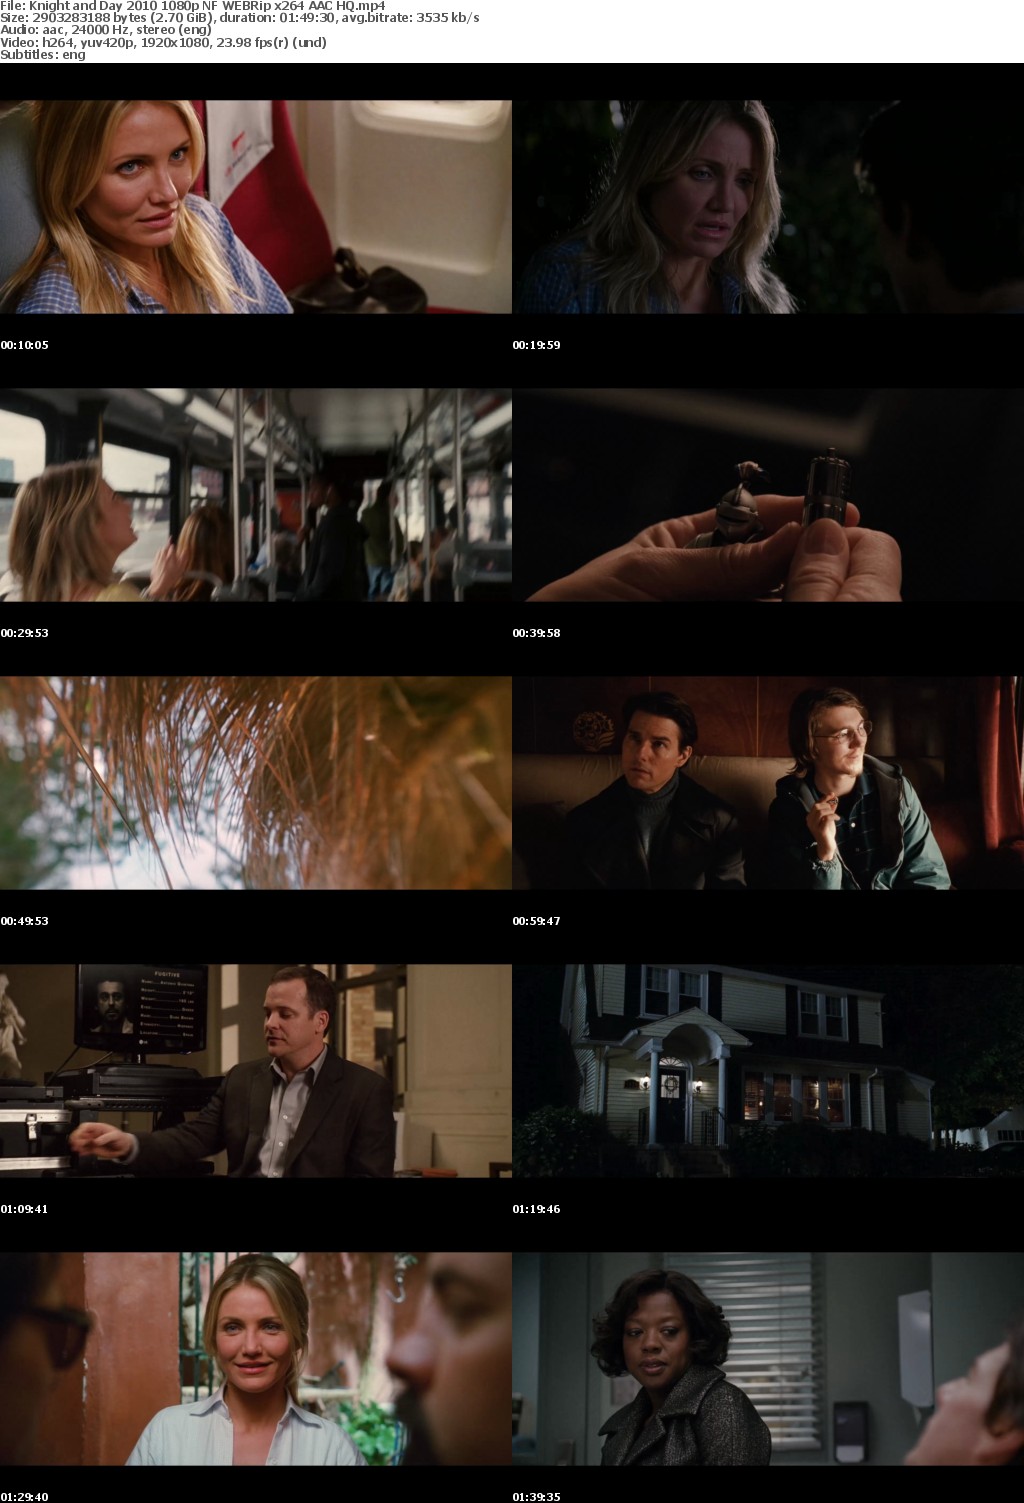 Knight and Day 2010 1080p NF WEBRip x264 AAC HQ